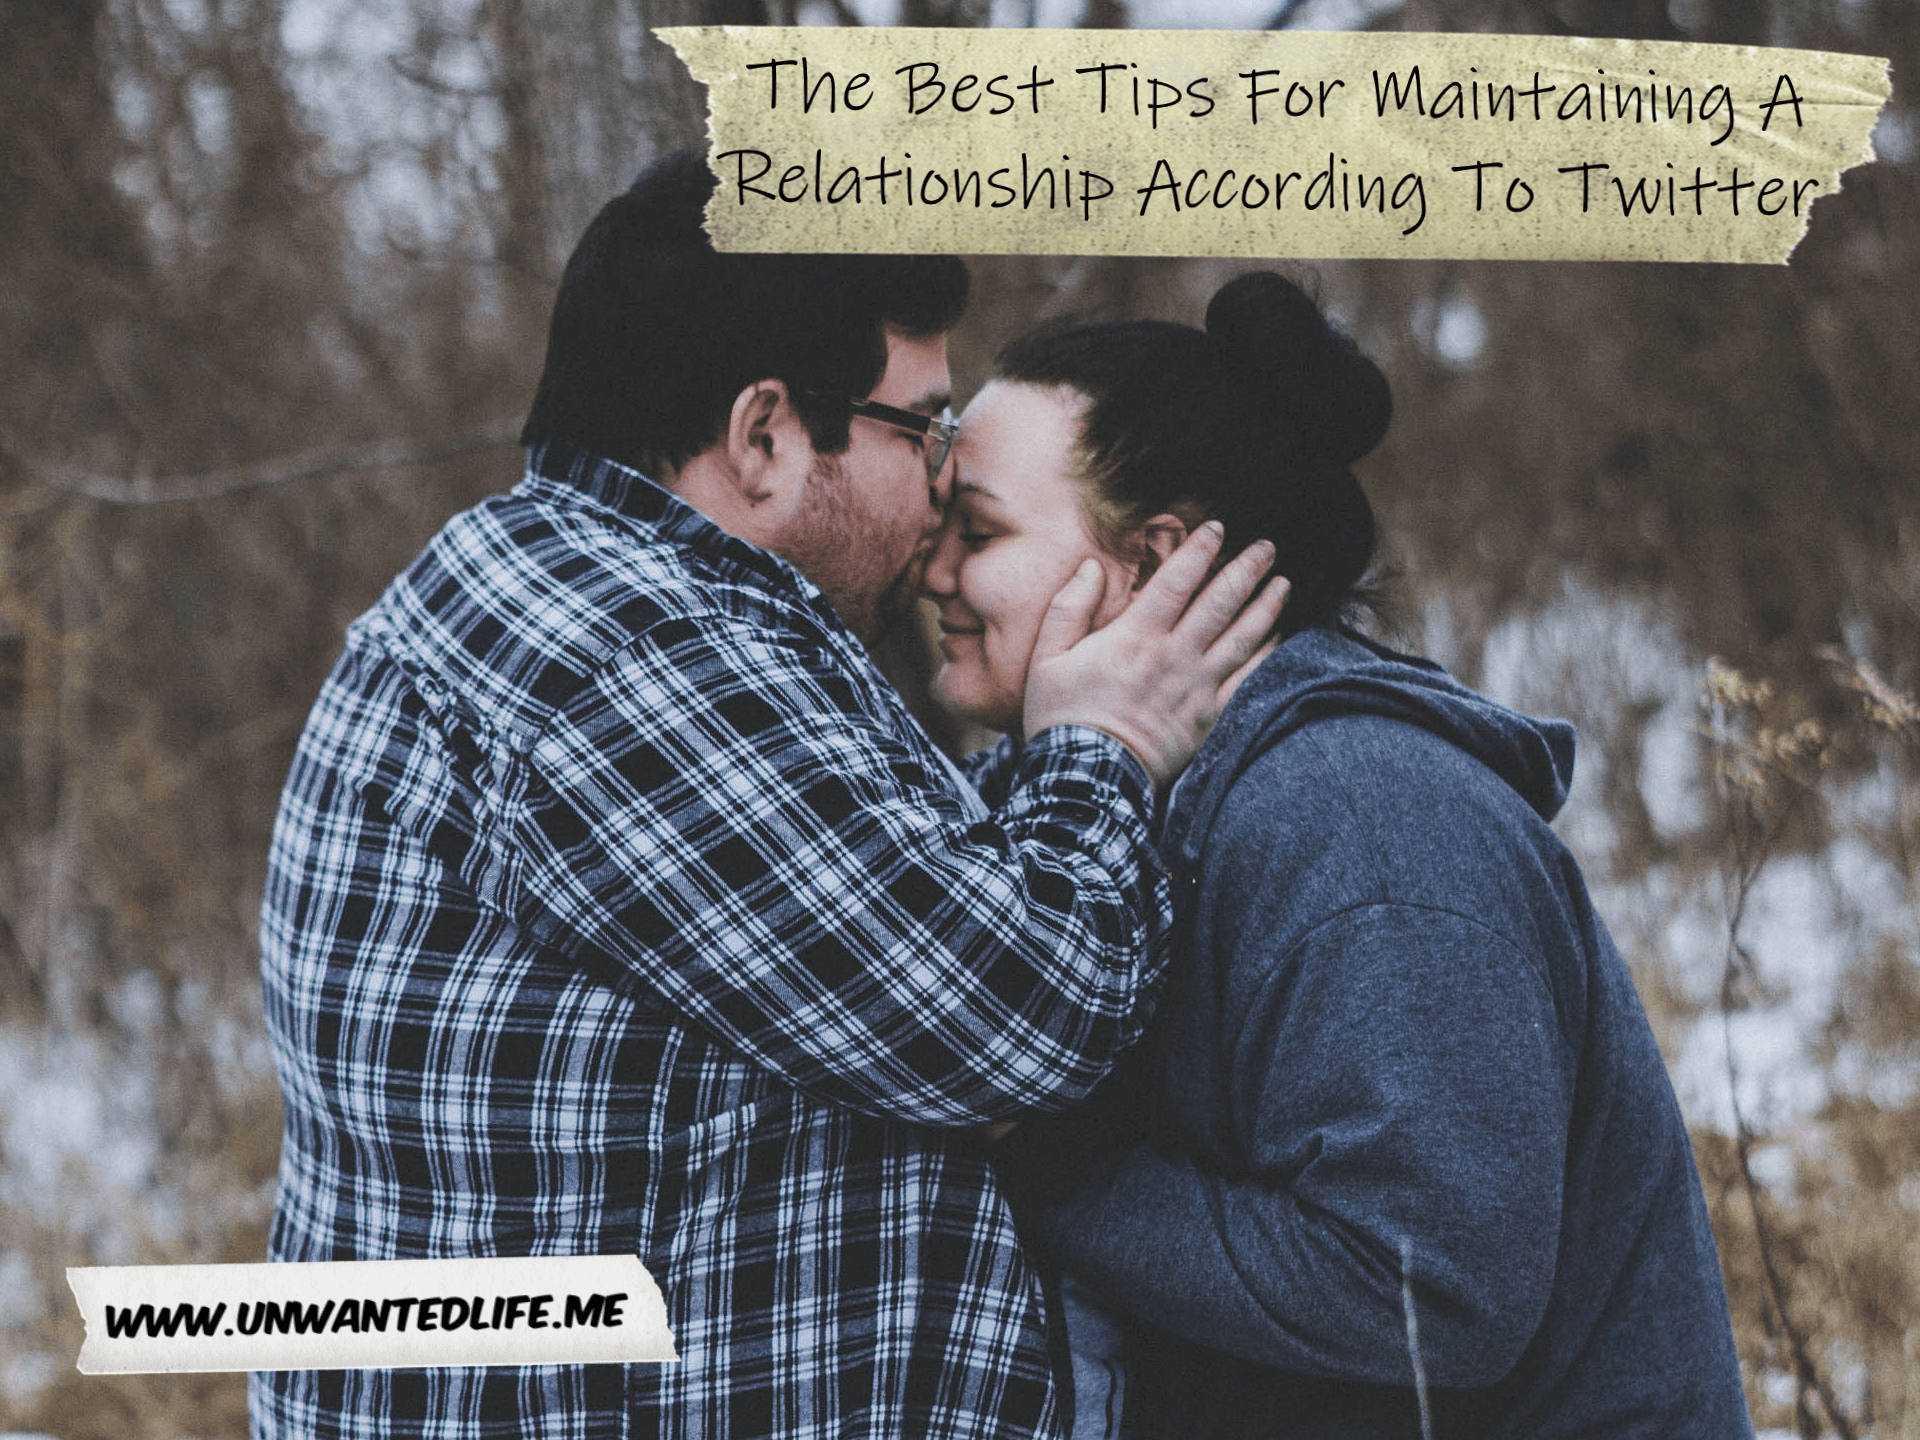 A photo of an overweight couple kissing outside during the winter with the article title - The Best Tips For Maintaining A Relationship According To Twitter - in the top right corner of the image